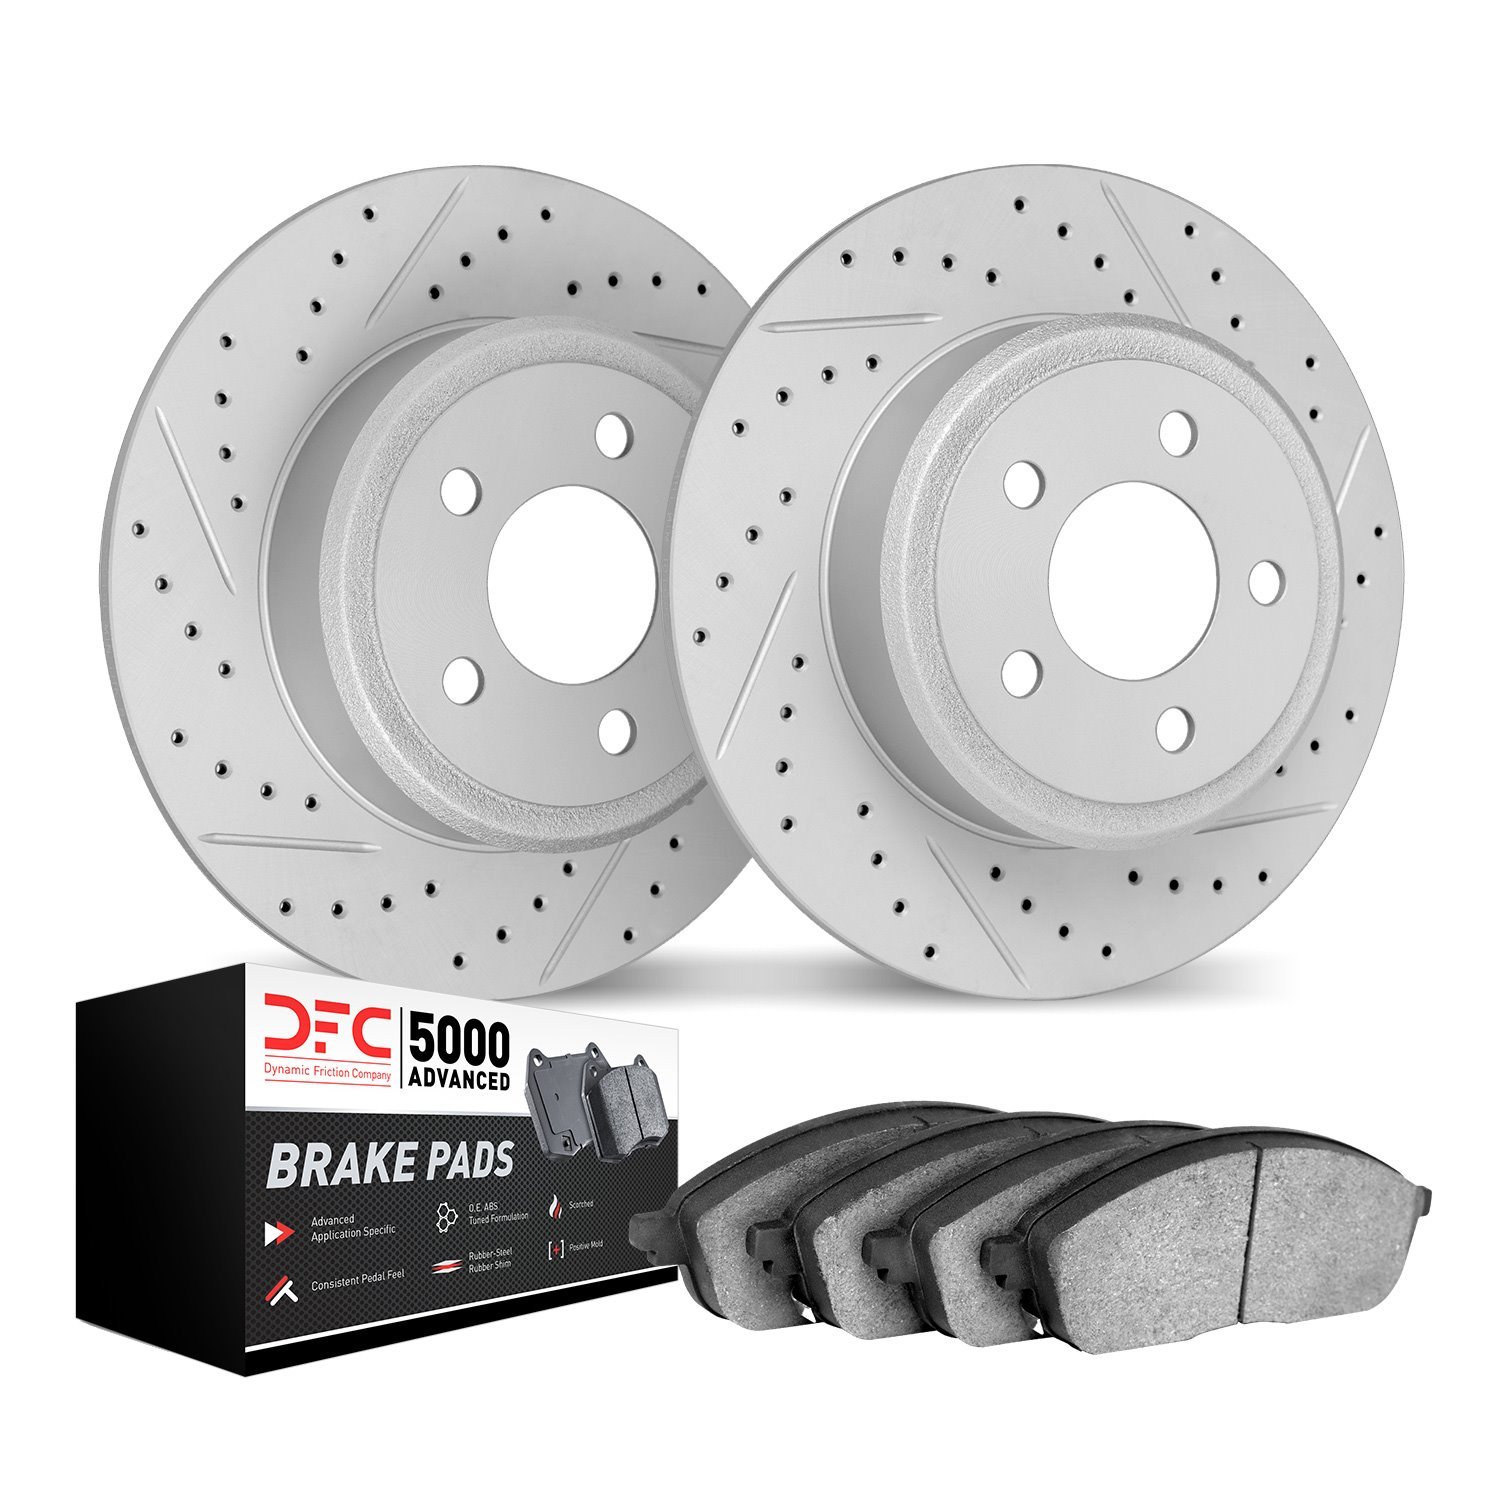 2502-63002 Geoperformance Drilled/Slotted Rotors w/5000 Advanced Brake Pads Kit, 1961-1991 Mercedes-Benz, Position: Rear